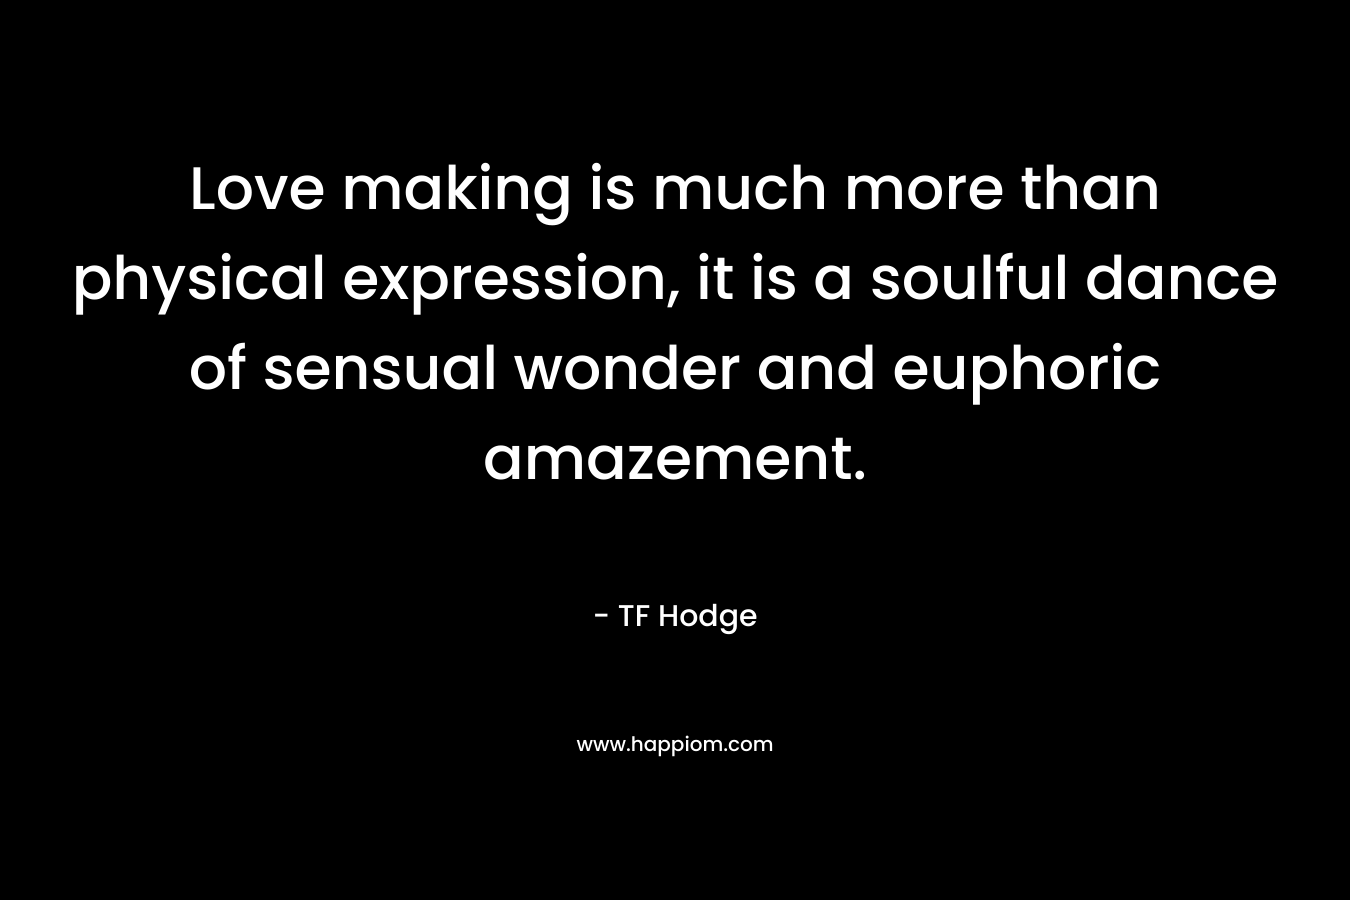 Love making is much more than physical expression, it is a soulful dance of sensual wonder and euphoric amazement. – TF Hodge